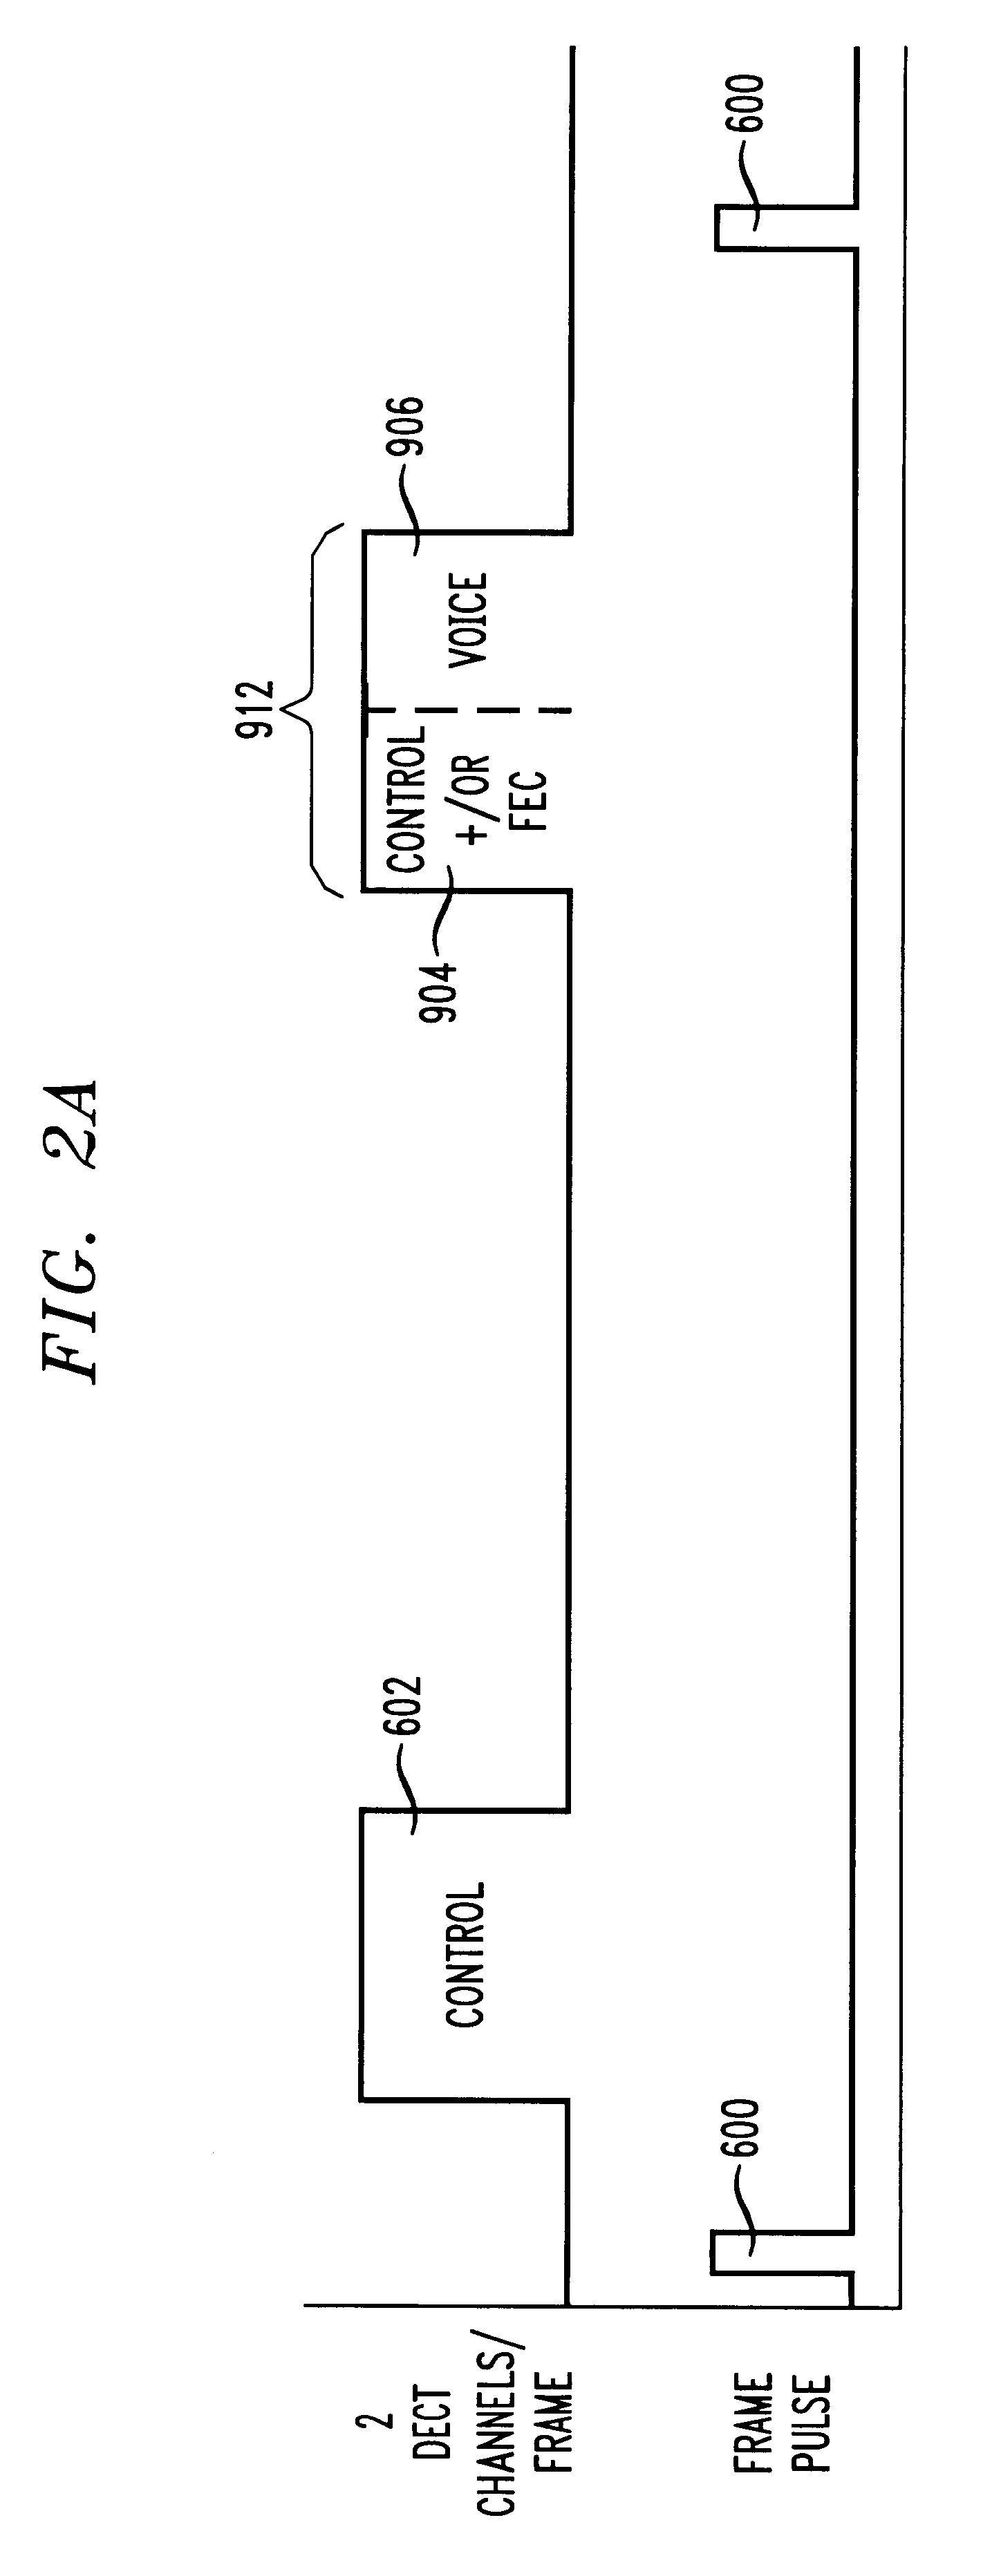 Method, apparatus, and communication protocol for transmitting control data with an improved error correction capability in a digital cordless telephone system